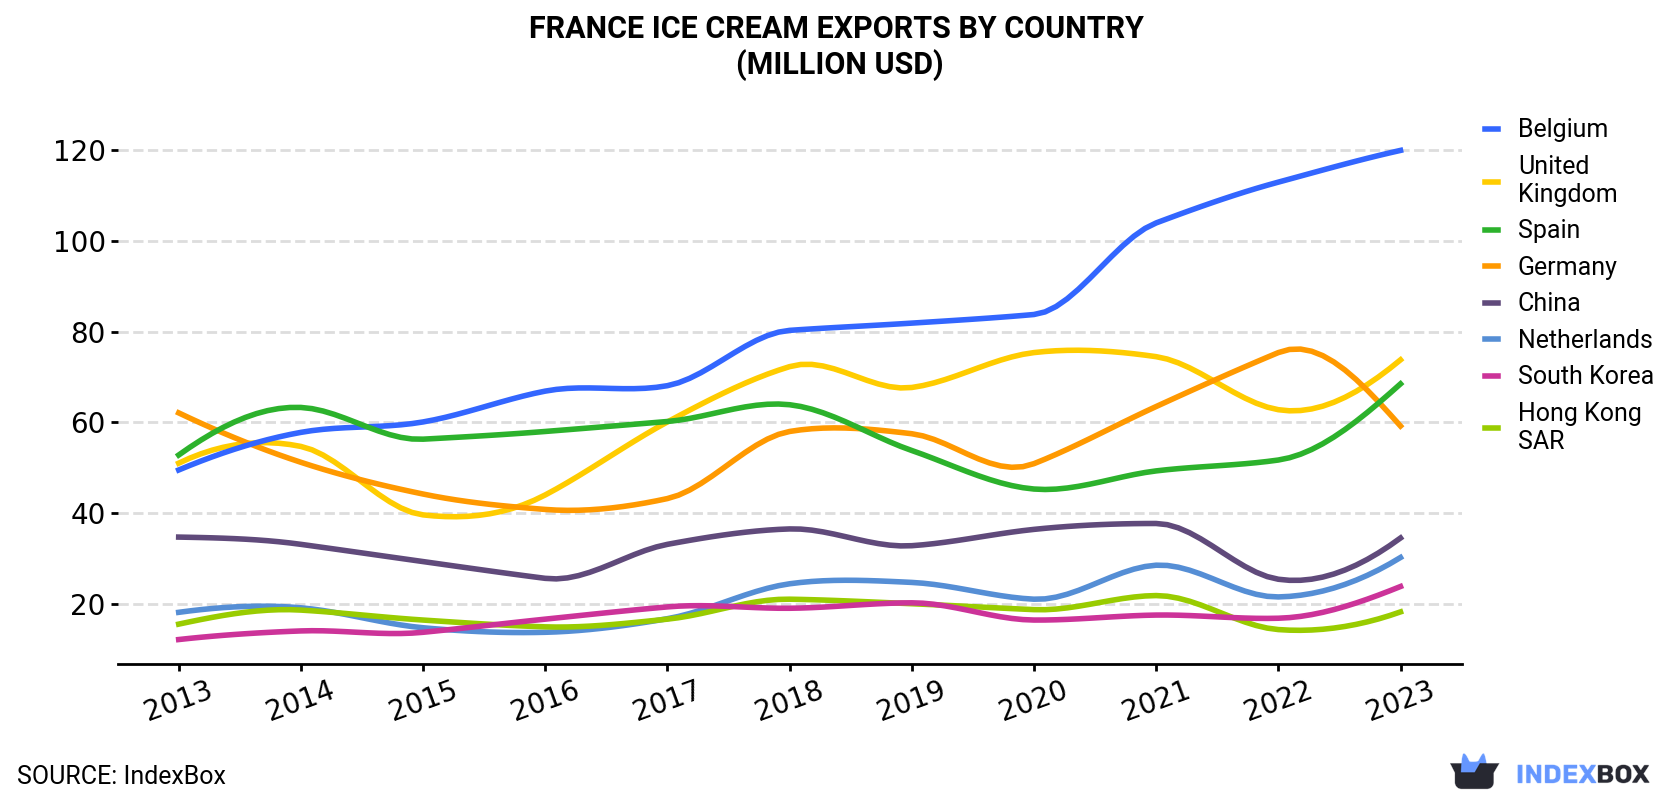 France Ice Cream Exports By Country (Million USD)